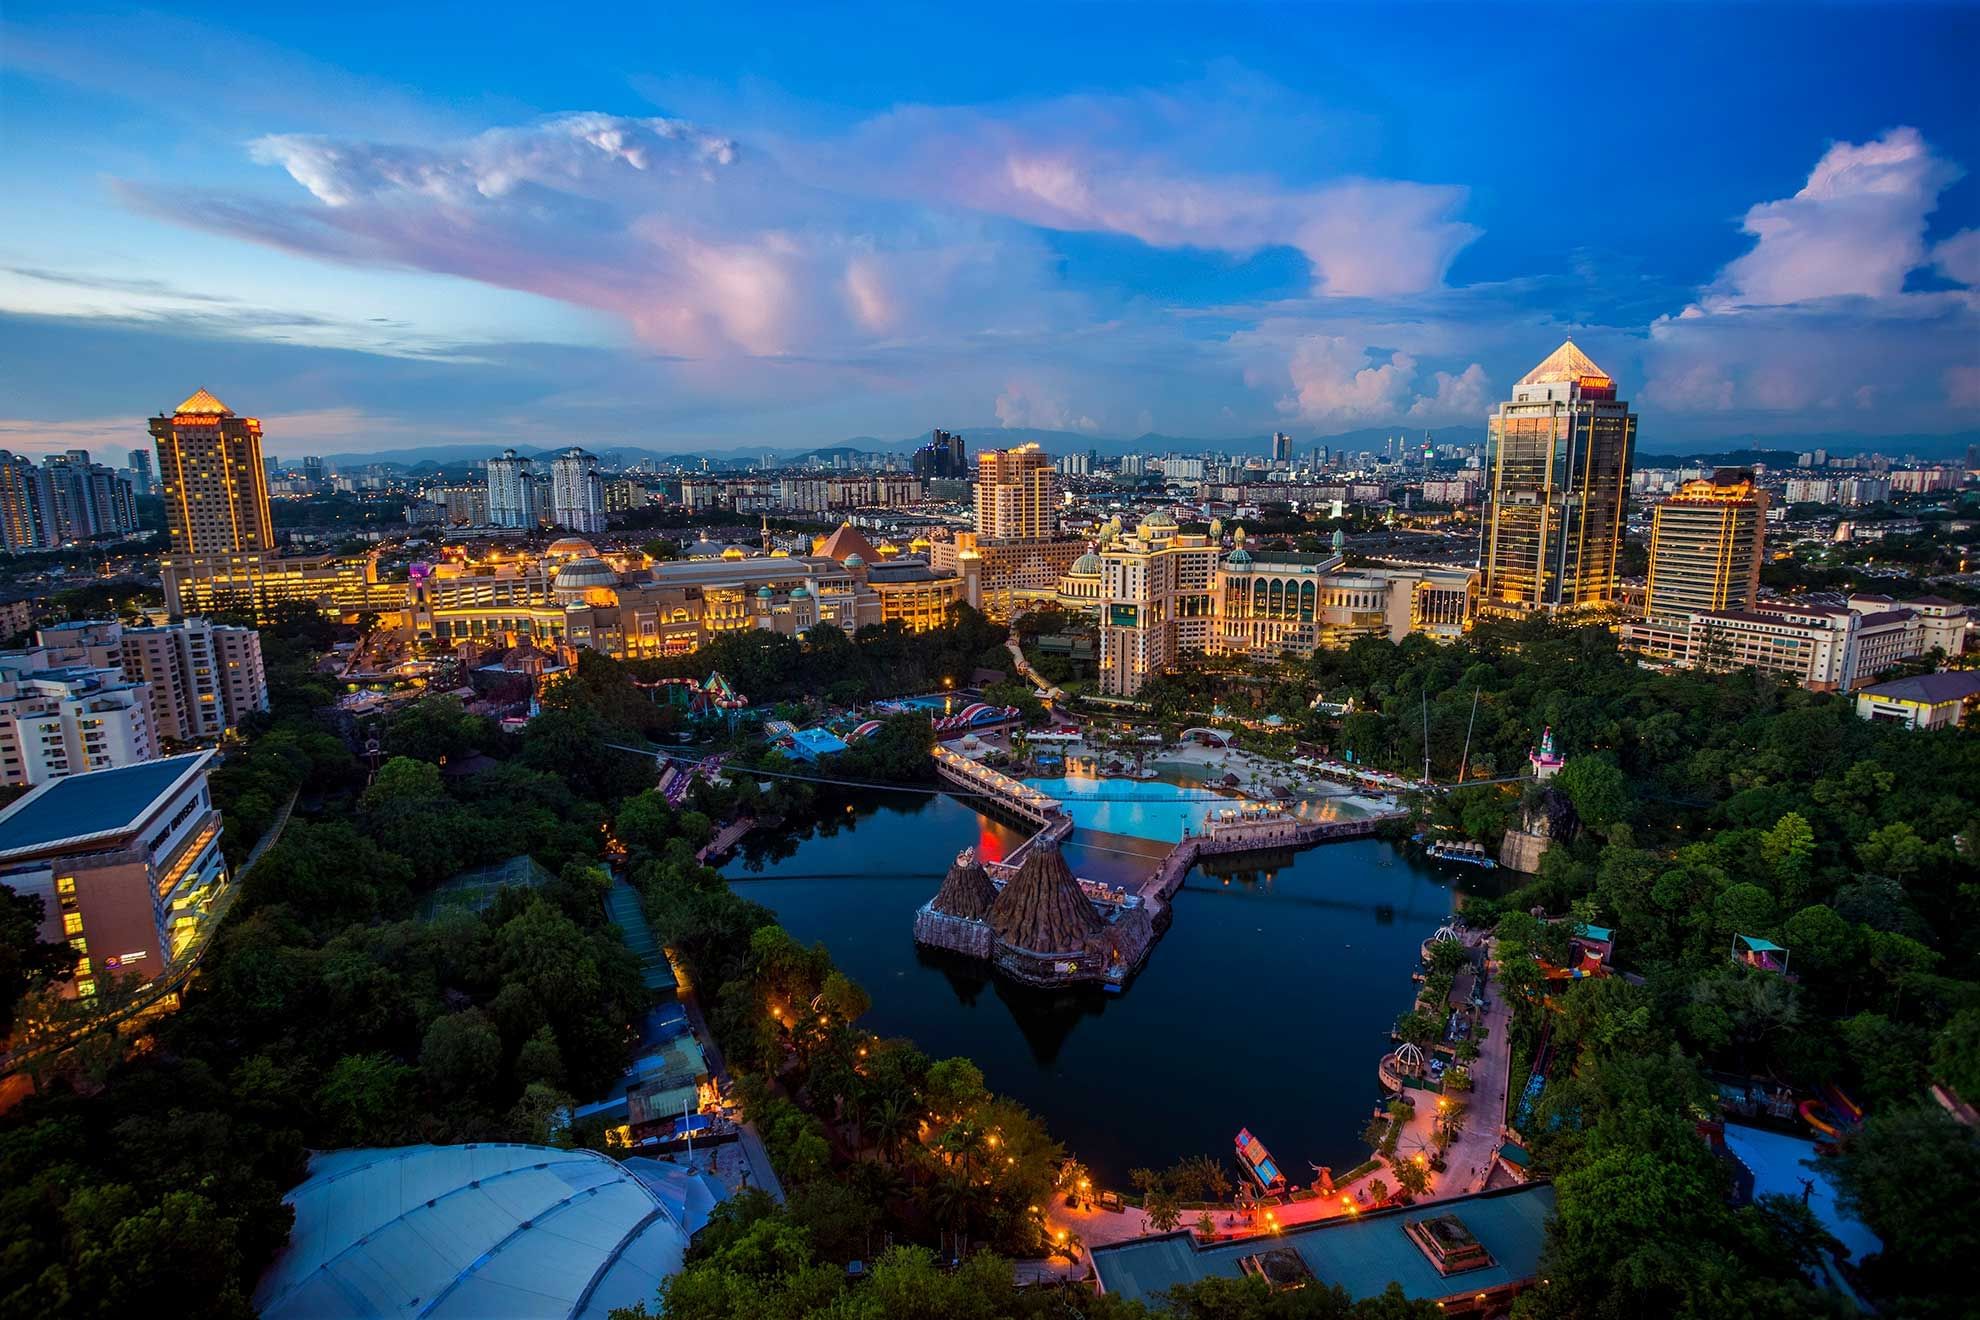 Aerial view of the city & Sunway Hotel Pyramid